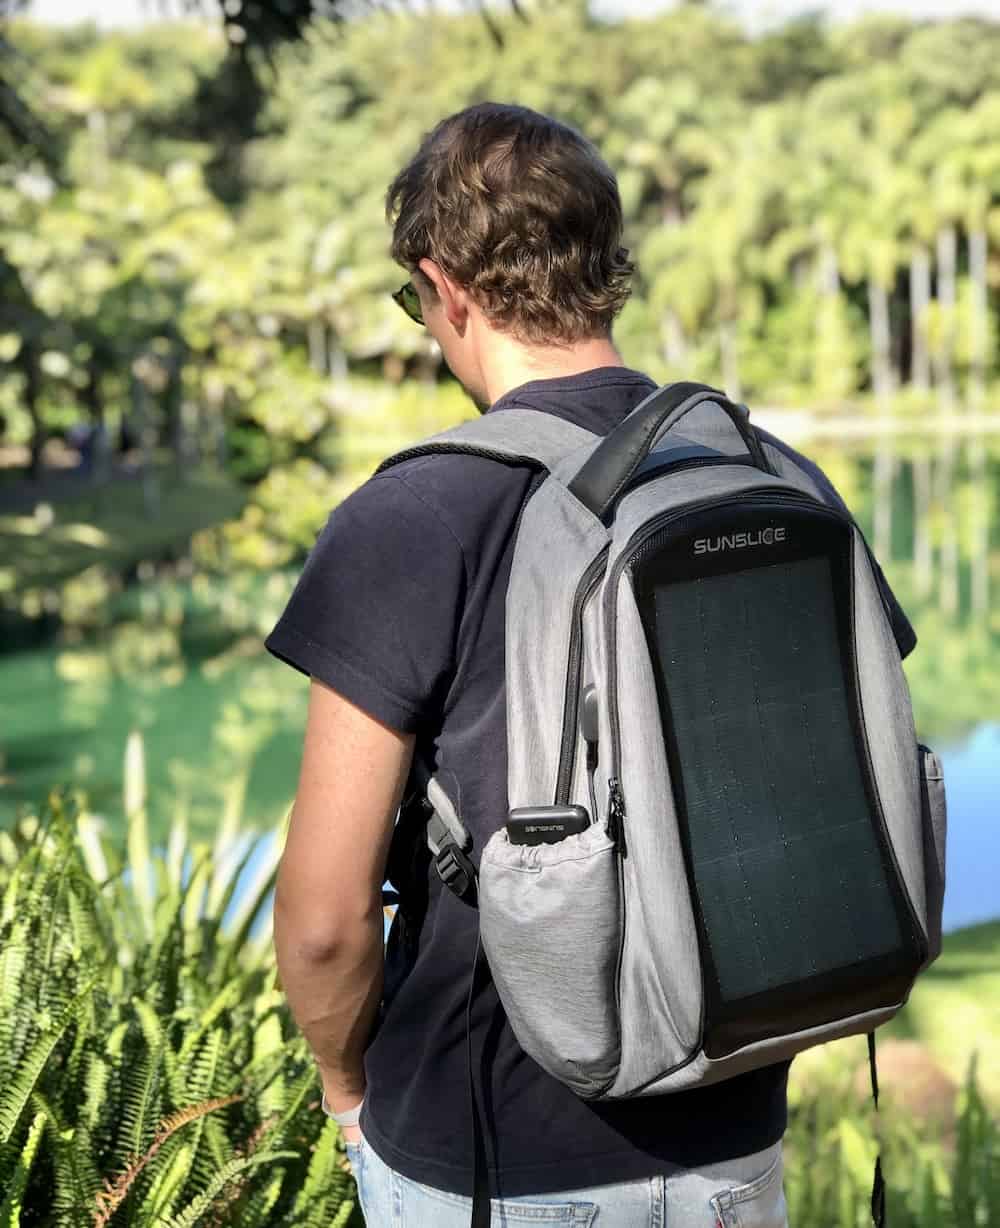 sunslice zenith solar backpack charging a powerbank and worn by a man